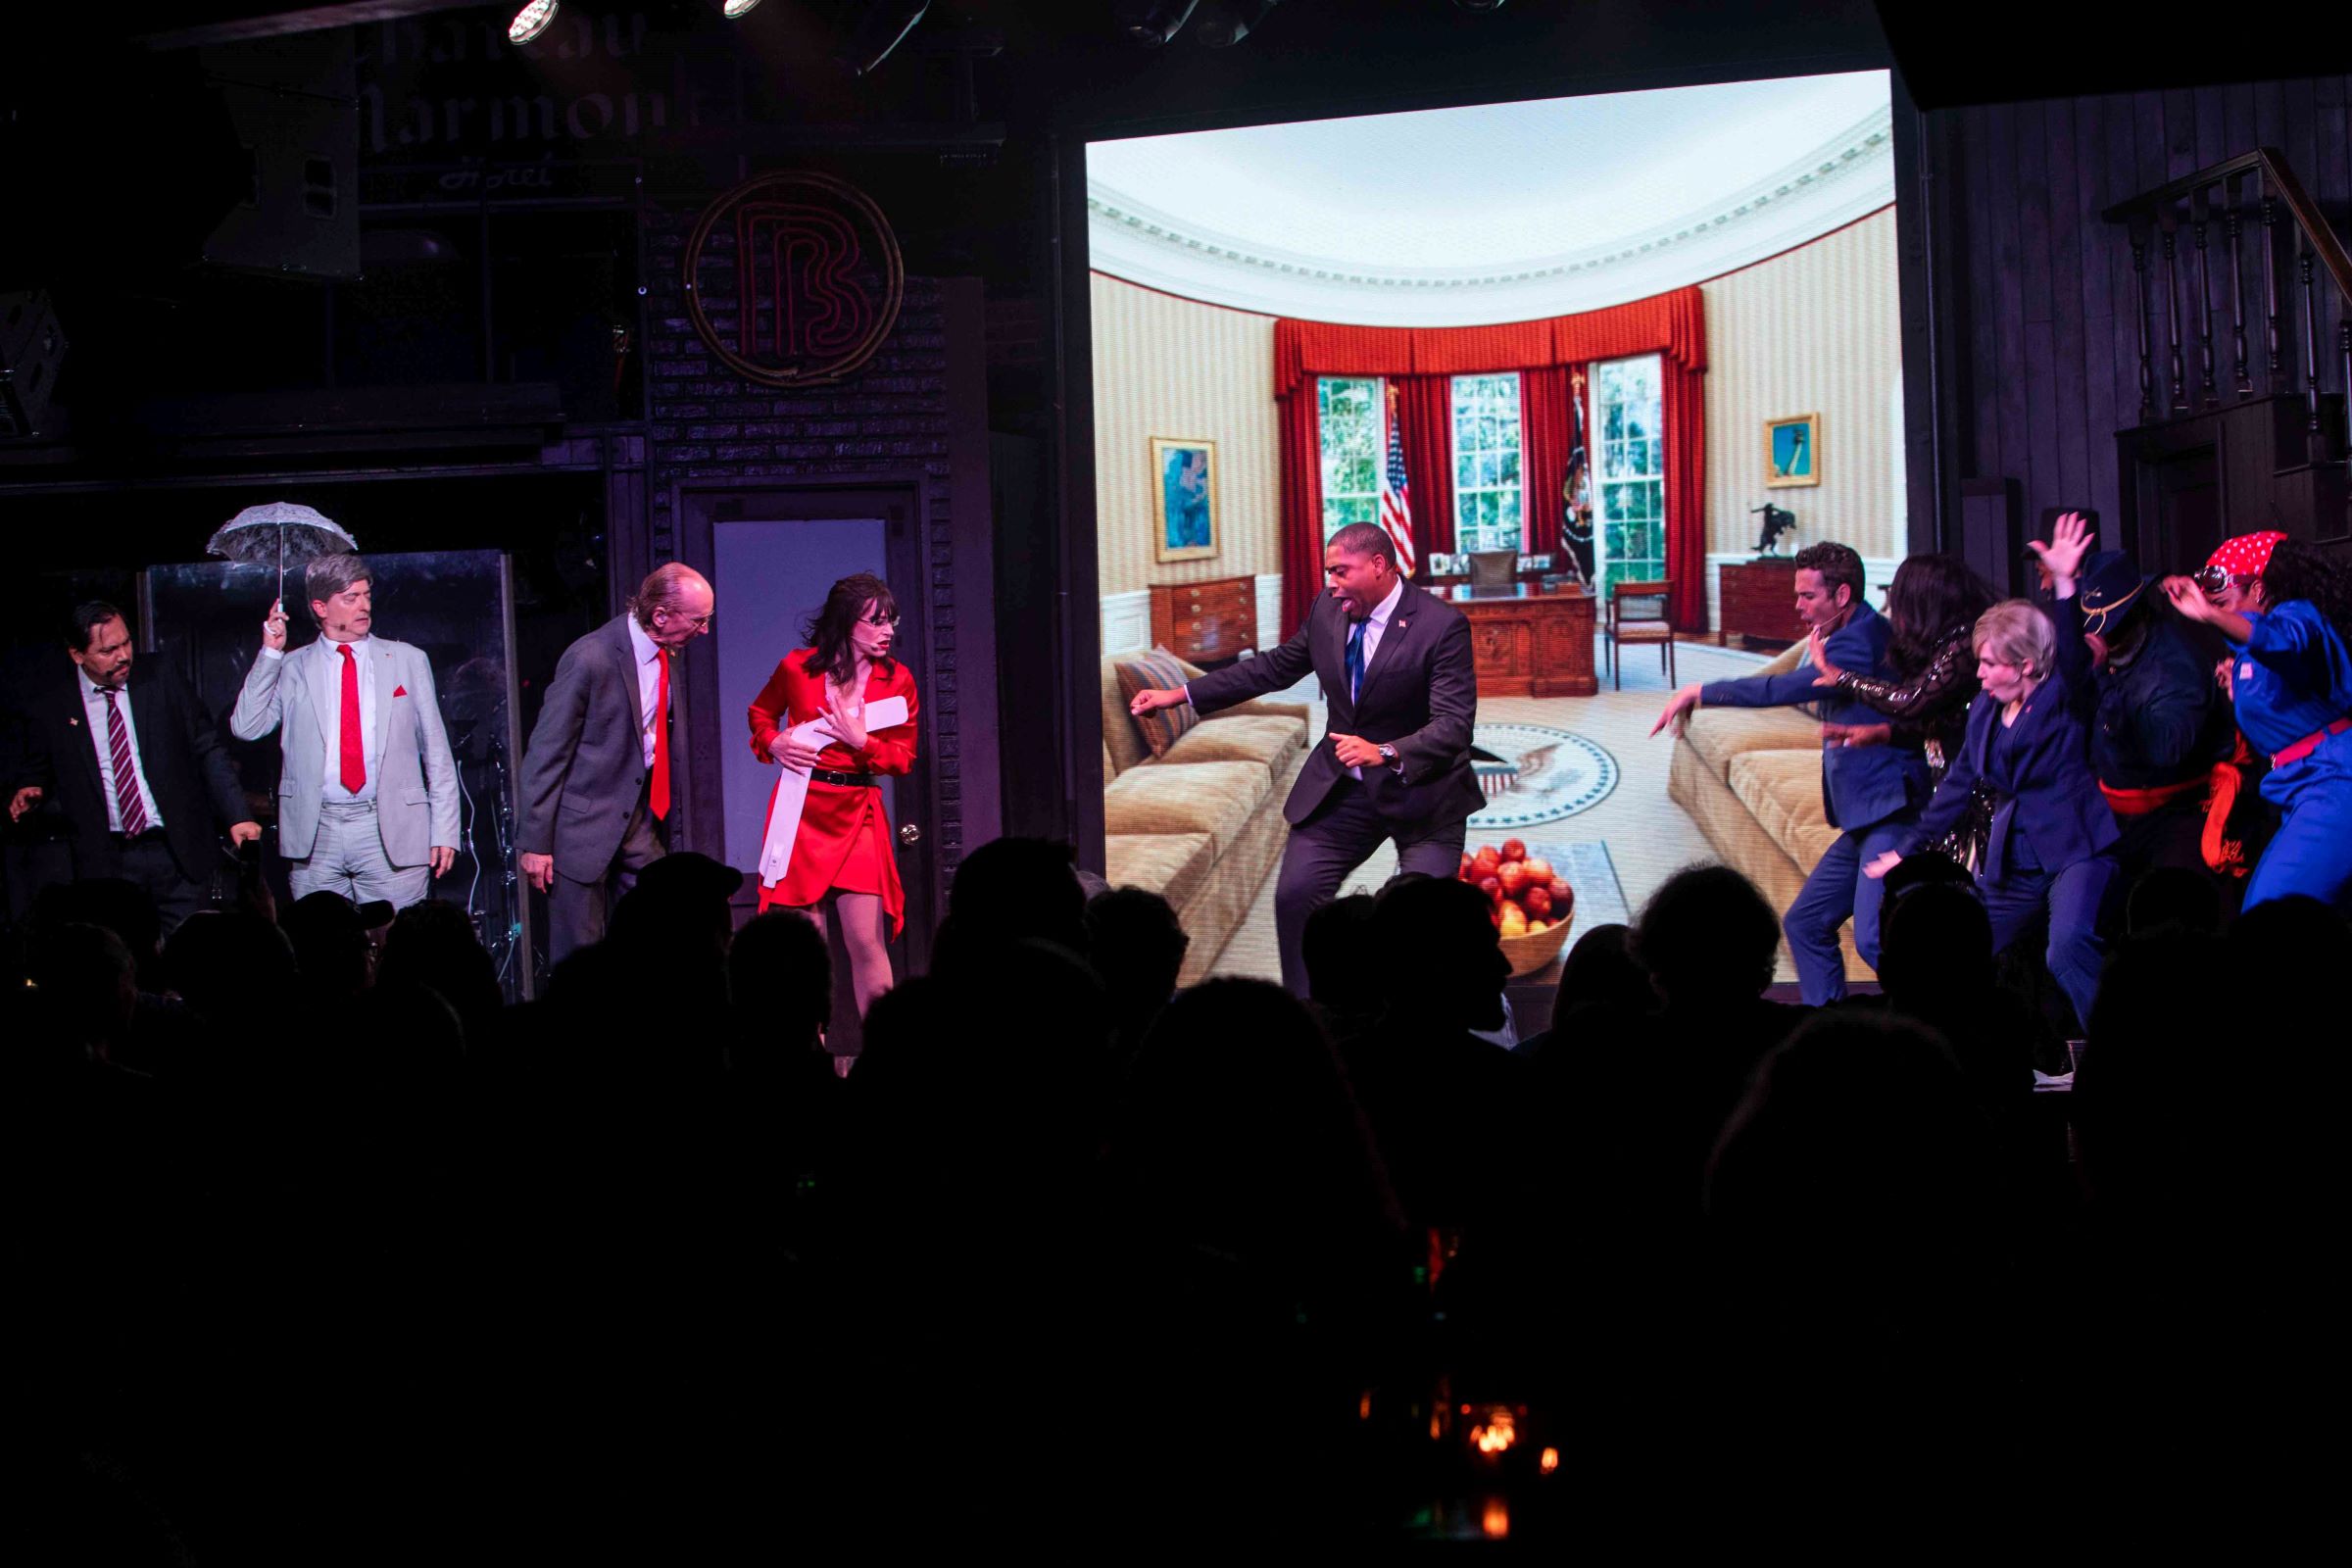 An image of the cast on stage at 44 – THE unOFFICIAL, unSANCTIONED OBAMA MUSICAL.